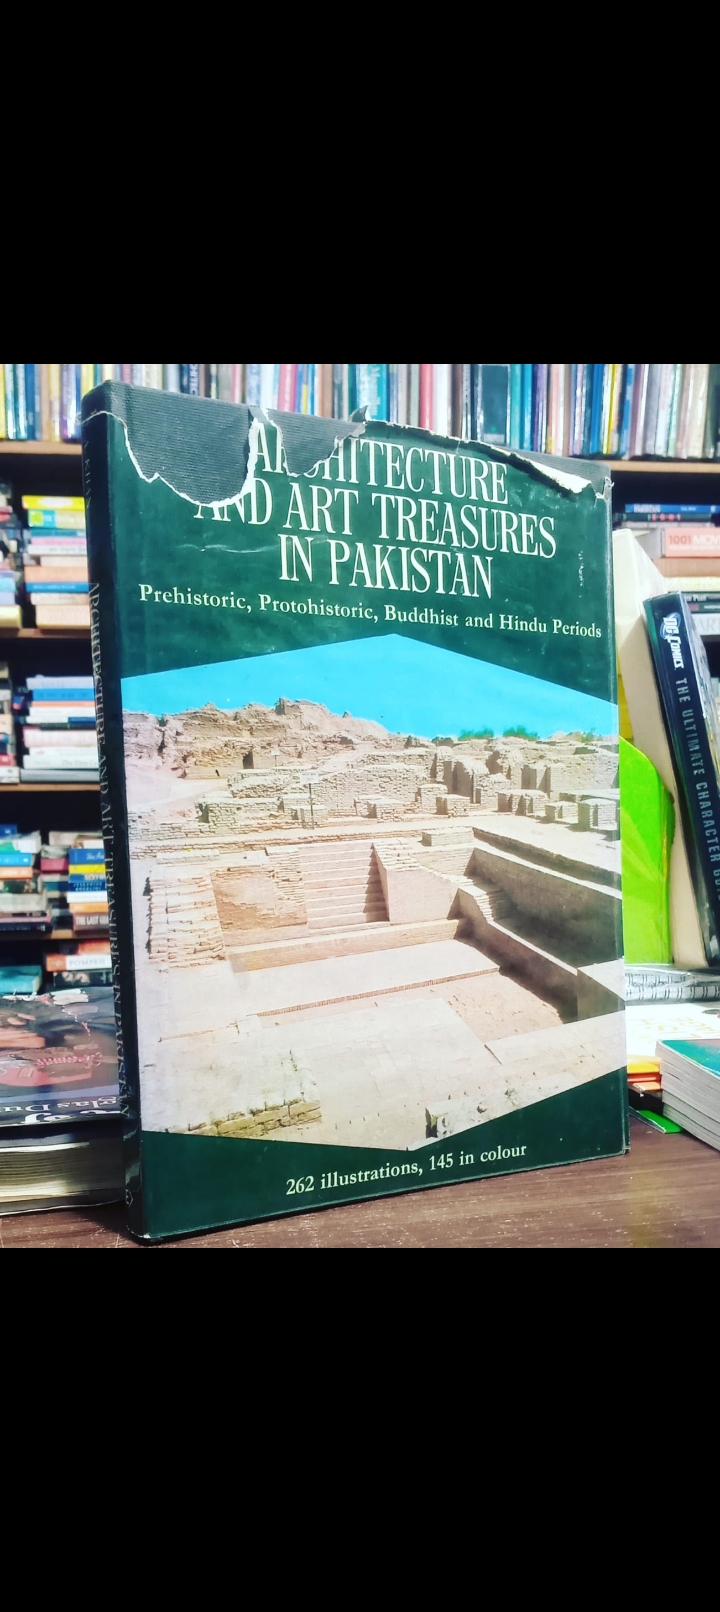 architecture and art treasures in pakistan prehistorical, protohistoric, buddhist and hindu periods 